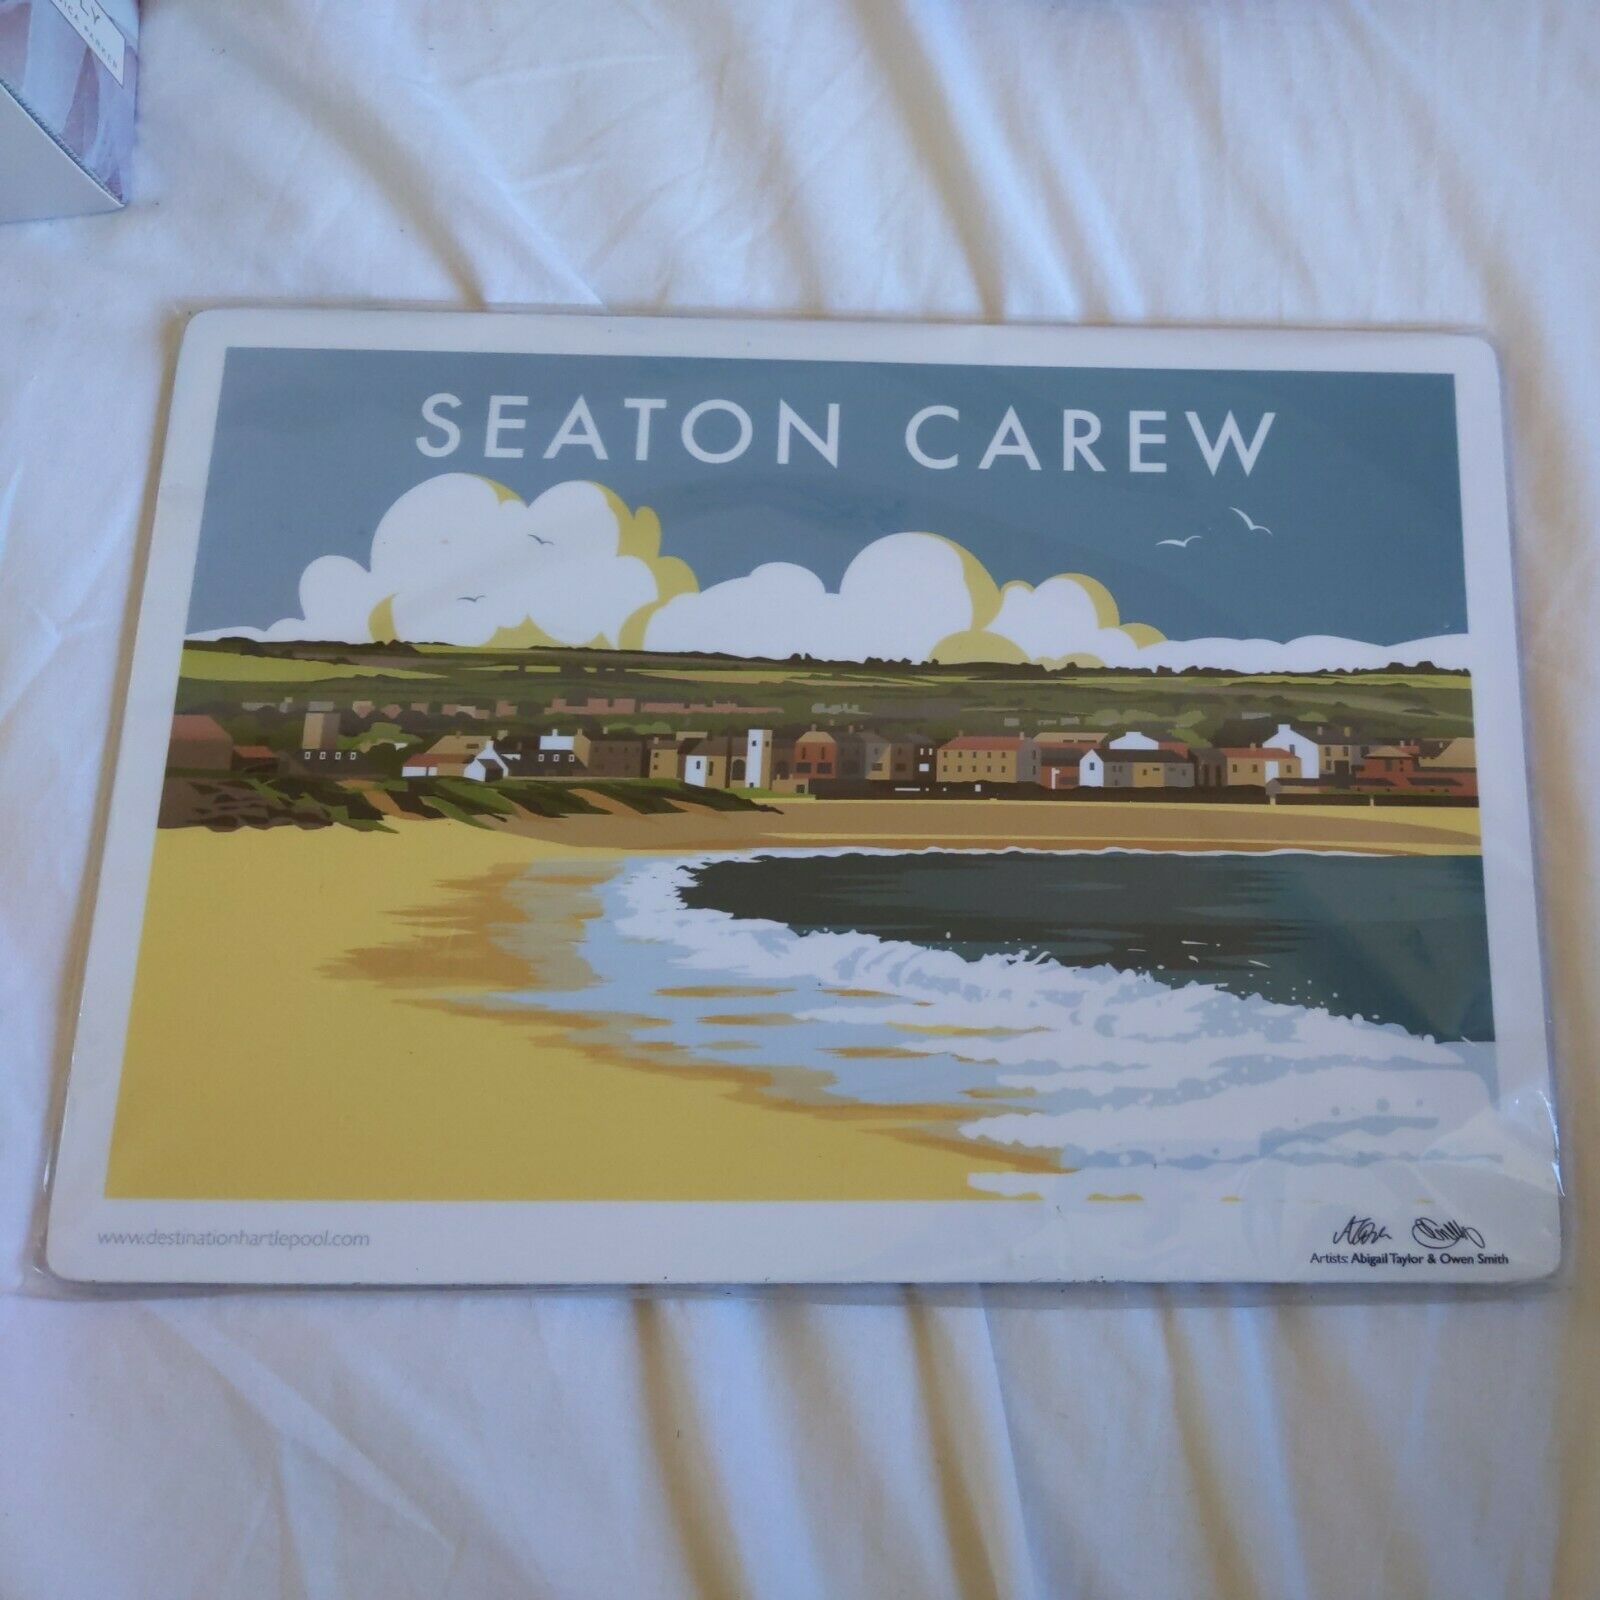 House Clearance - Bnip Seaton Carew Hartlepool A4 Size Picture